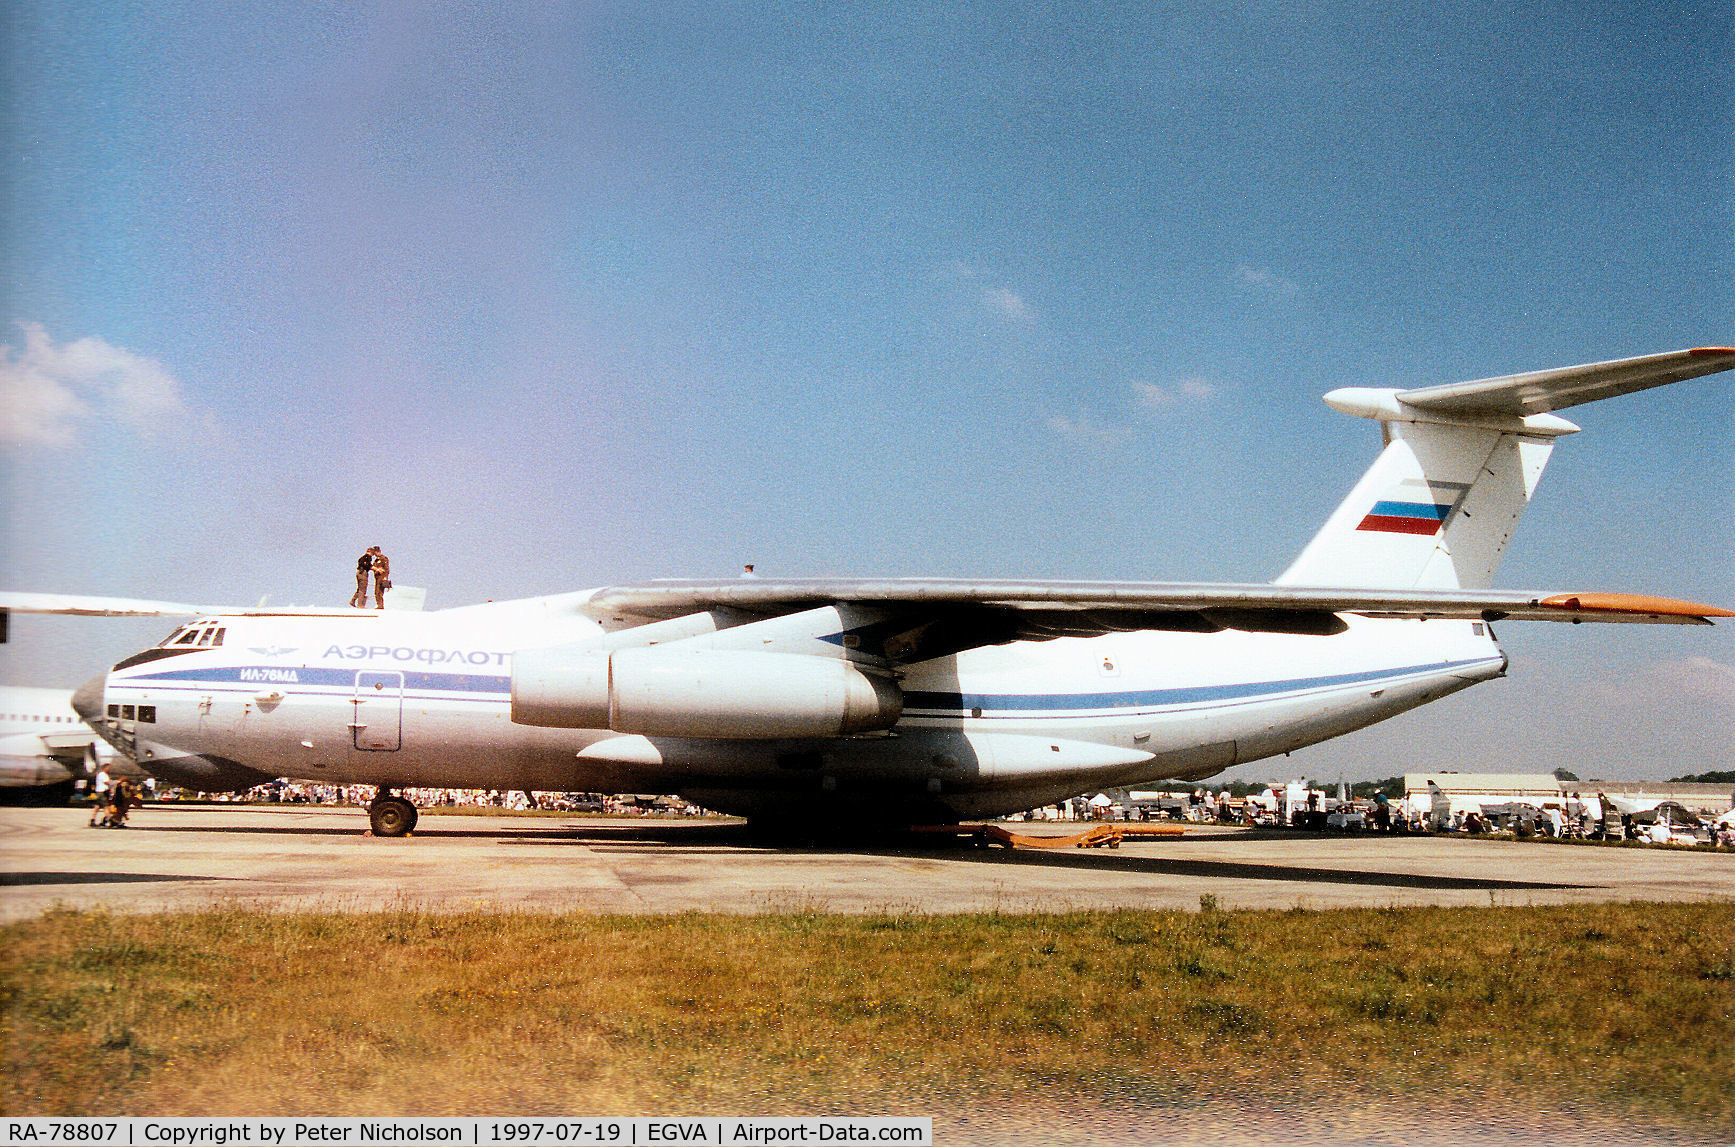 RA-78807, 1989 Ilyushin Il-76MD C/N 0093493791, Ilyushin Il-76MA Candid on display at the 1997 Intnl Air Tattoo at RAF Fairford which, whilst in Aeroflot markings, was operated by the Russian Air Force.